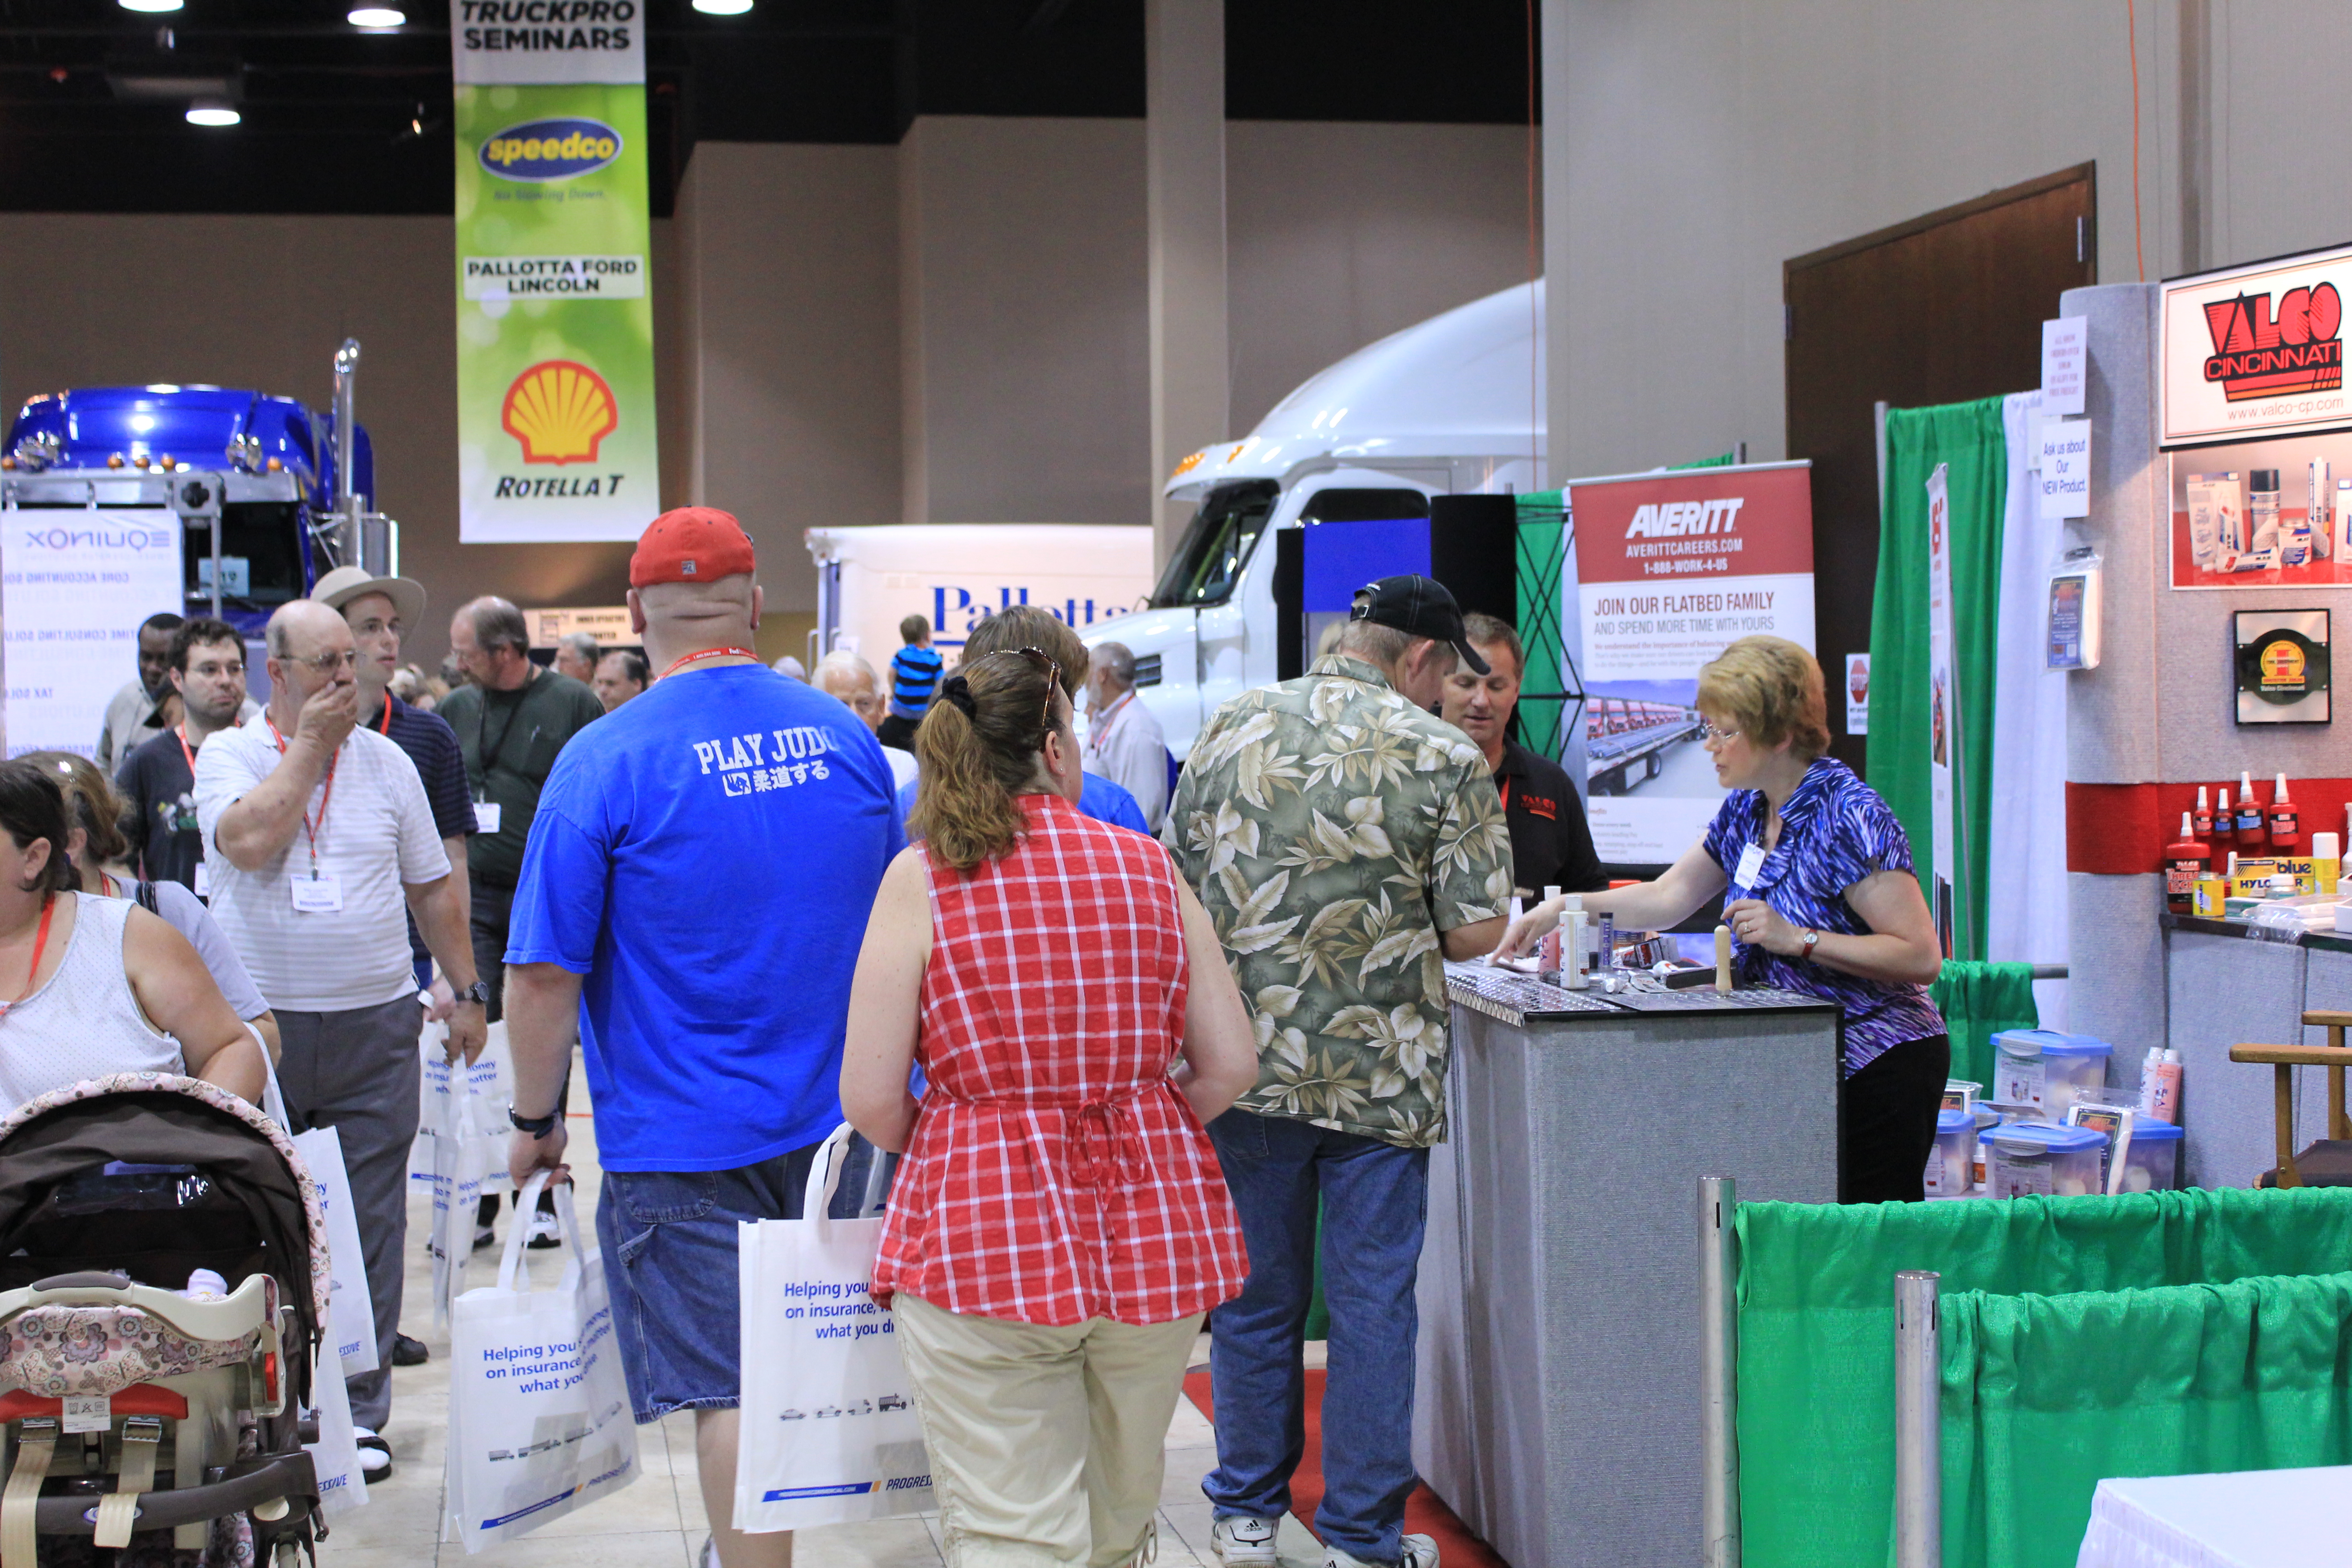 Expedite Expo 2013: The Trucking Event For YOU!